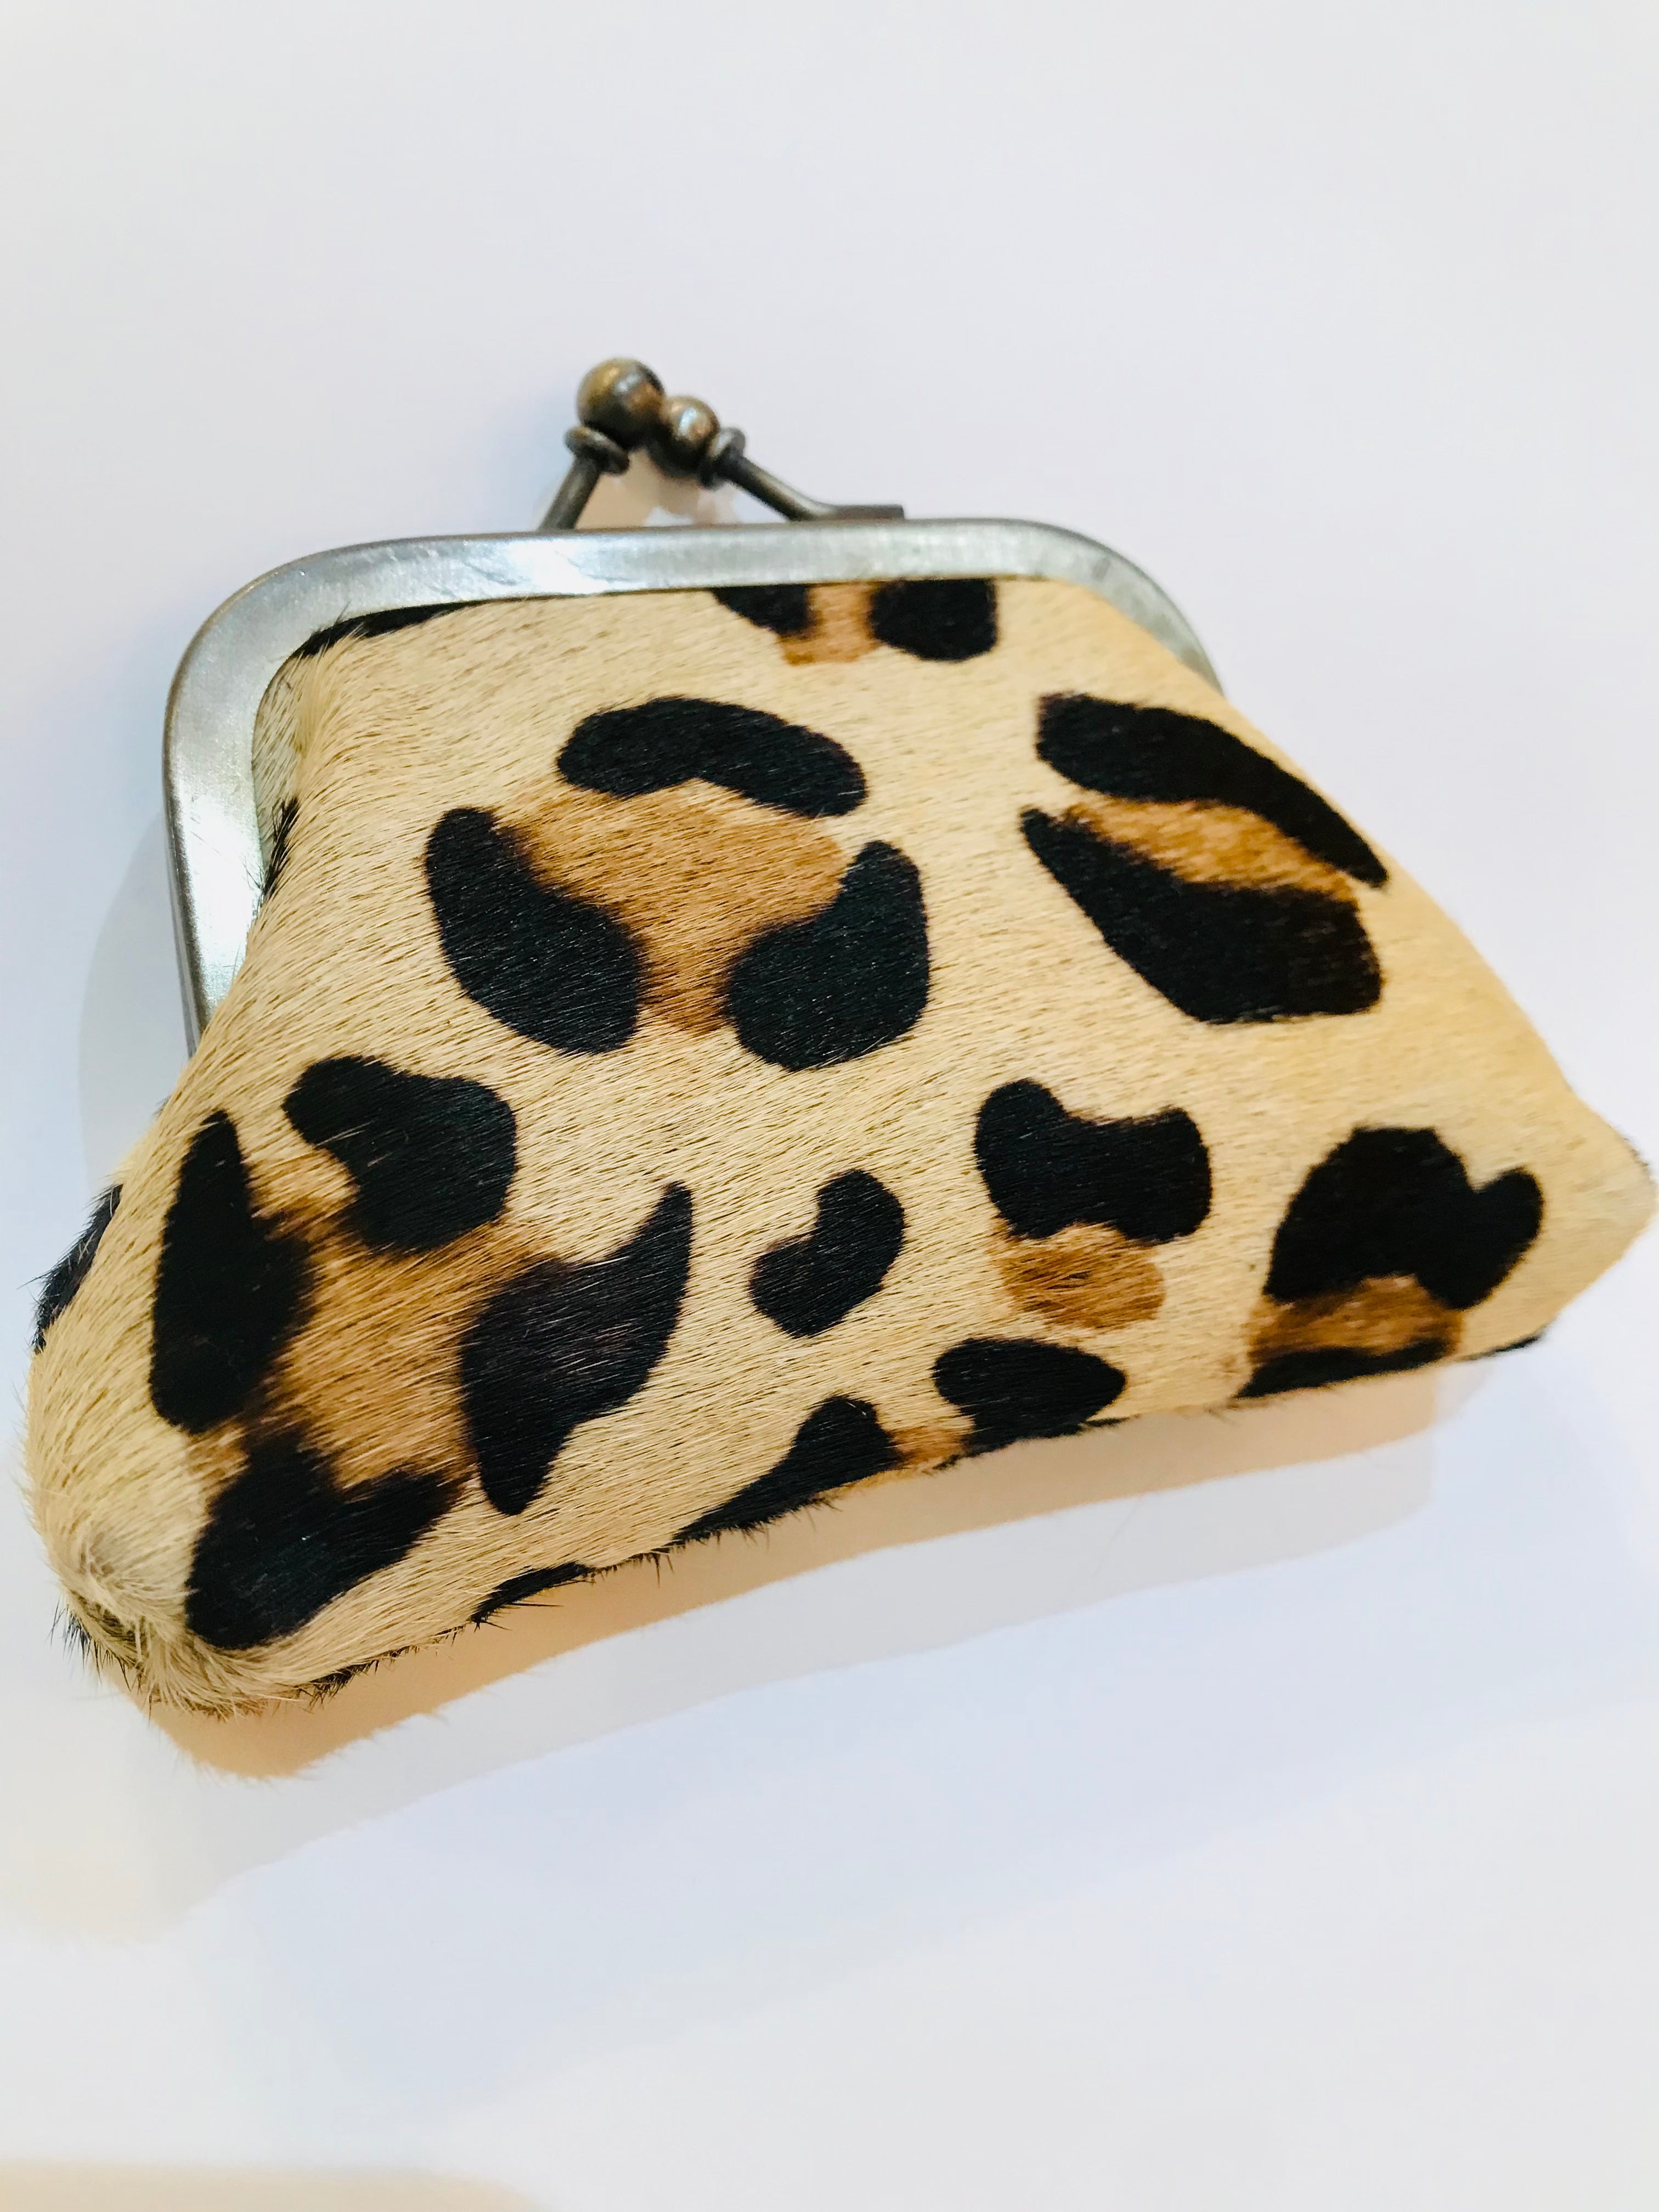 Small Fur Coin Purse - The Nancy Smillie Shop - Art, Jewellery & Designer Gifts Glasgow